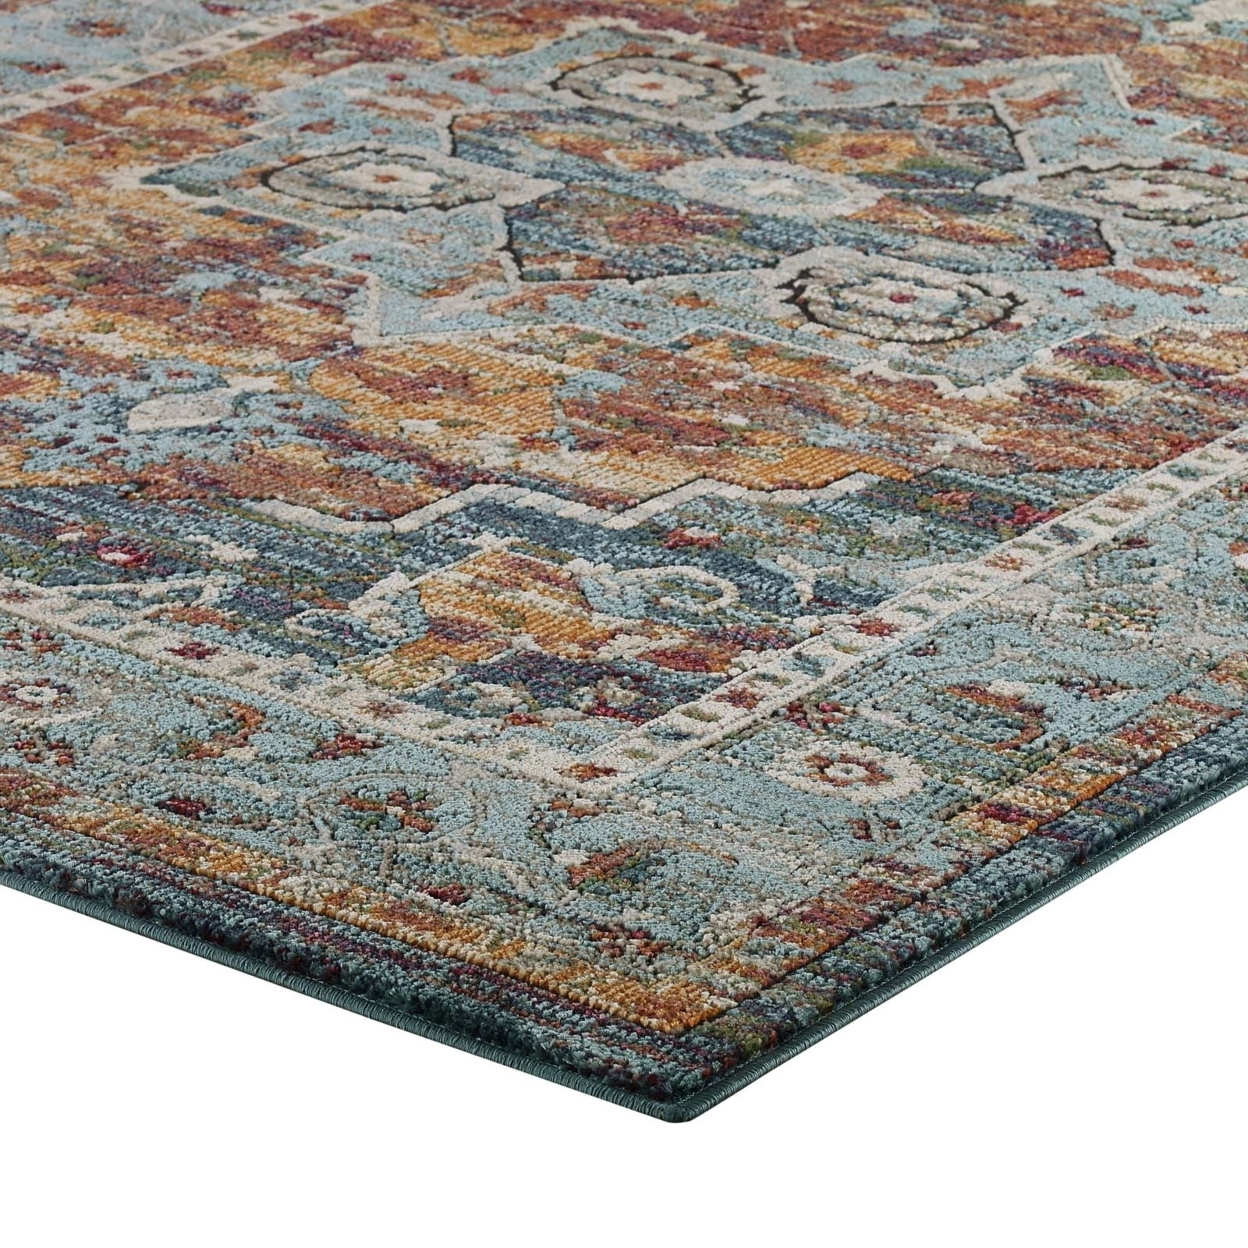 Tribute Diantha Distressed Vintage Floral Persian Medallion 5x8 Area Rug, Multicolored